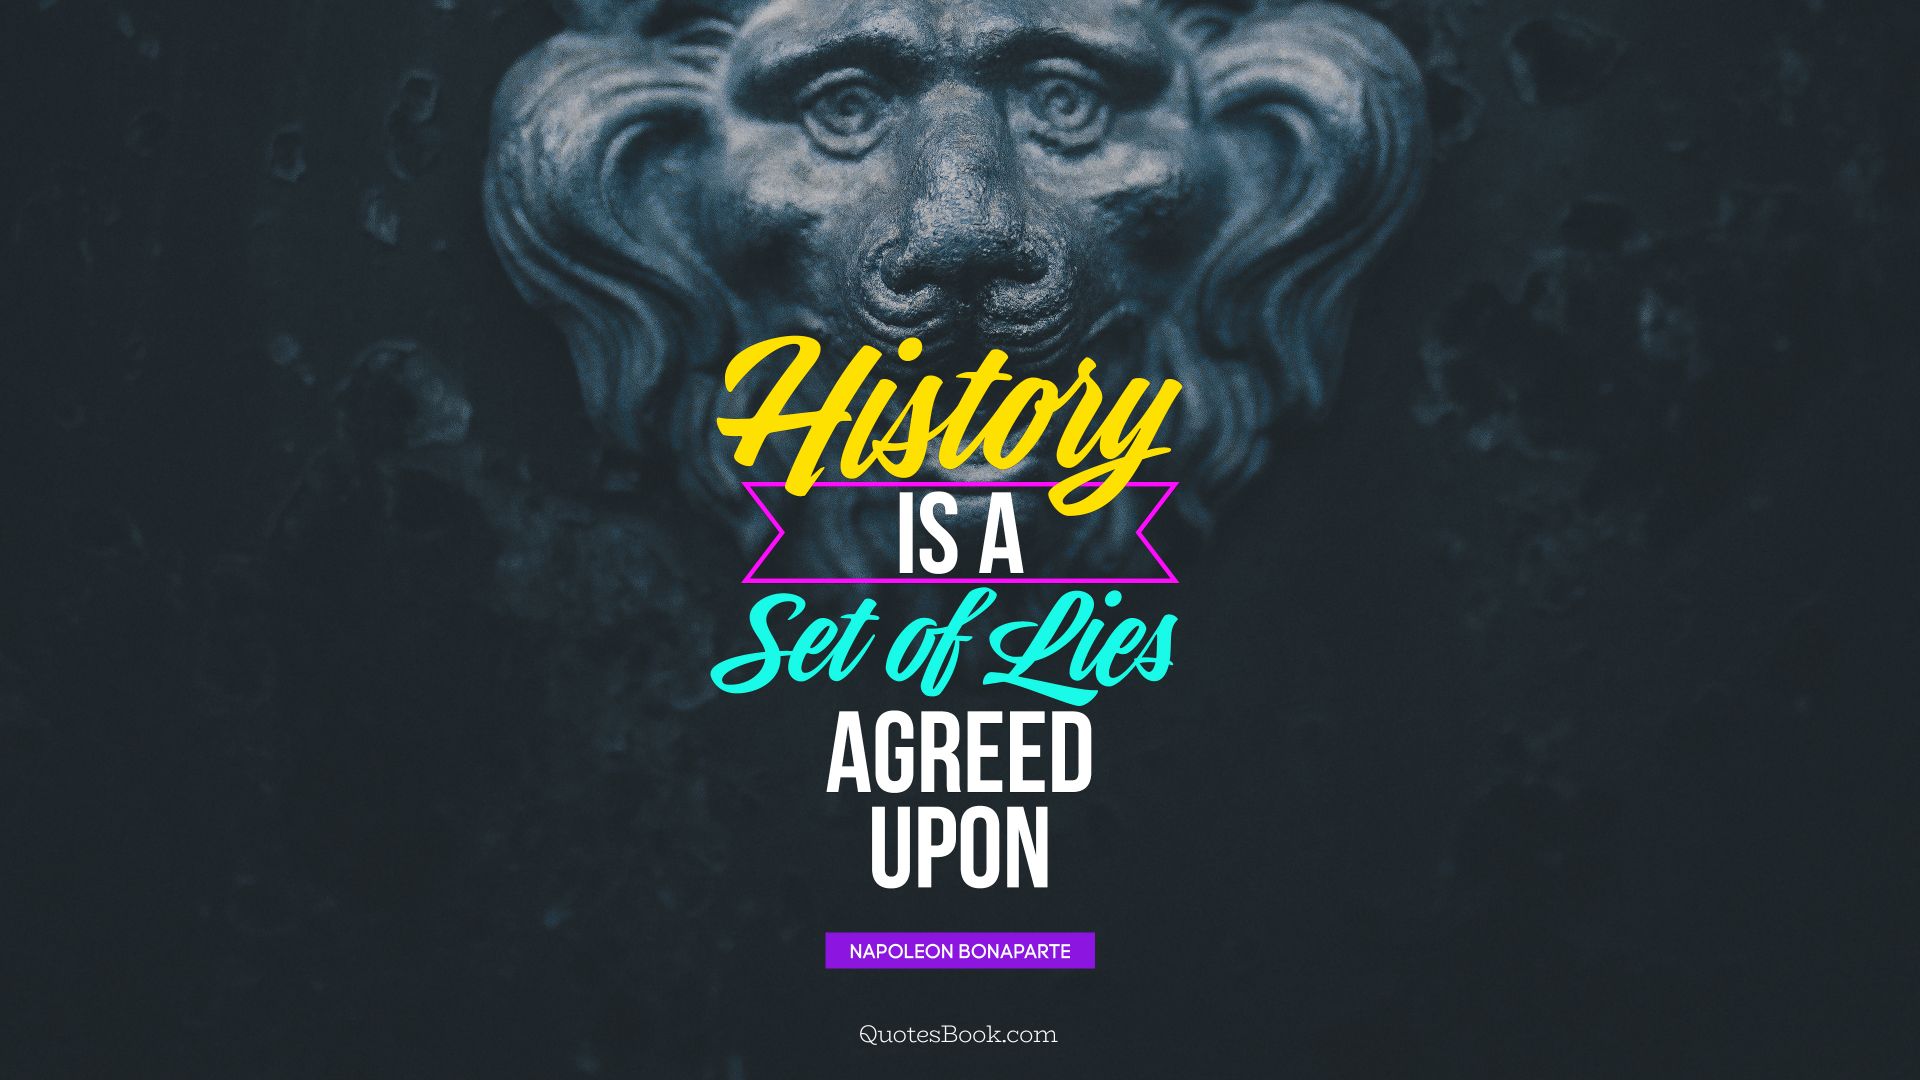 History is a set of lies agreed upon. - Quote by Napoleon Bonaparte